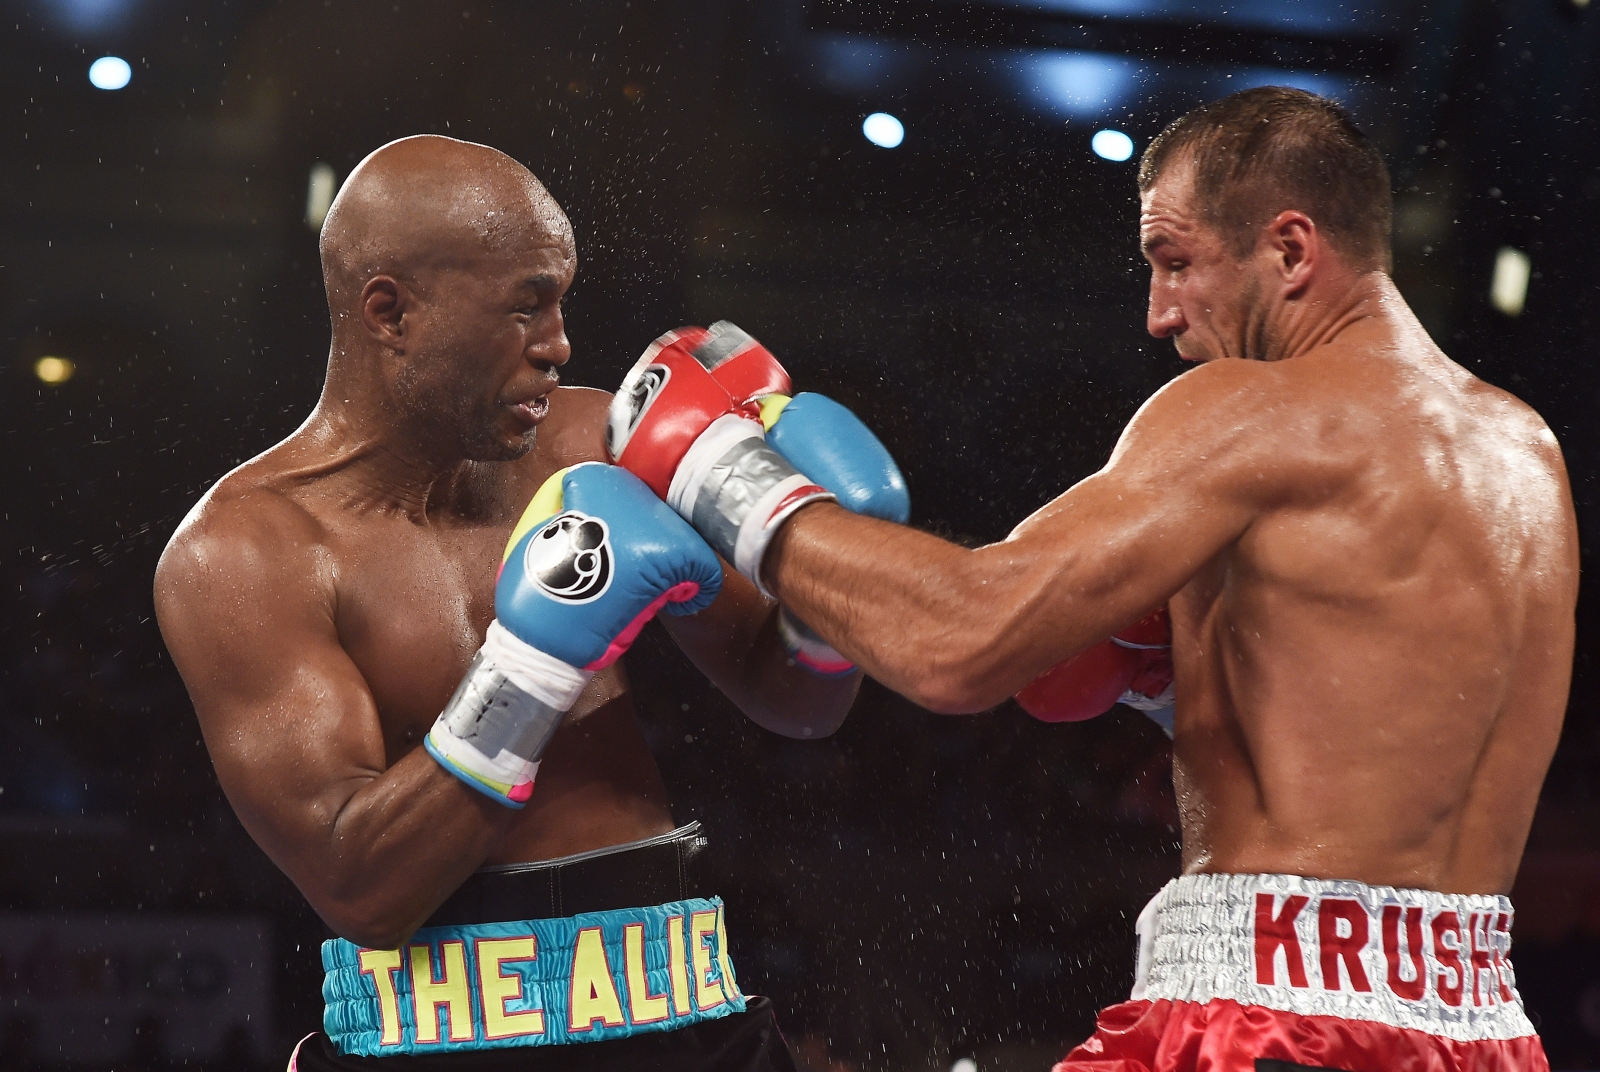 Bernard Hopkins vs Joe Smith: How to watch, preview, odds, undercard and prediction